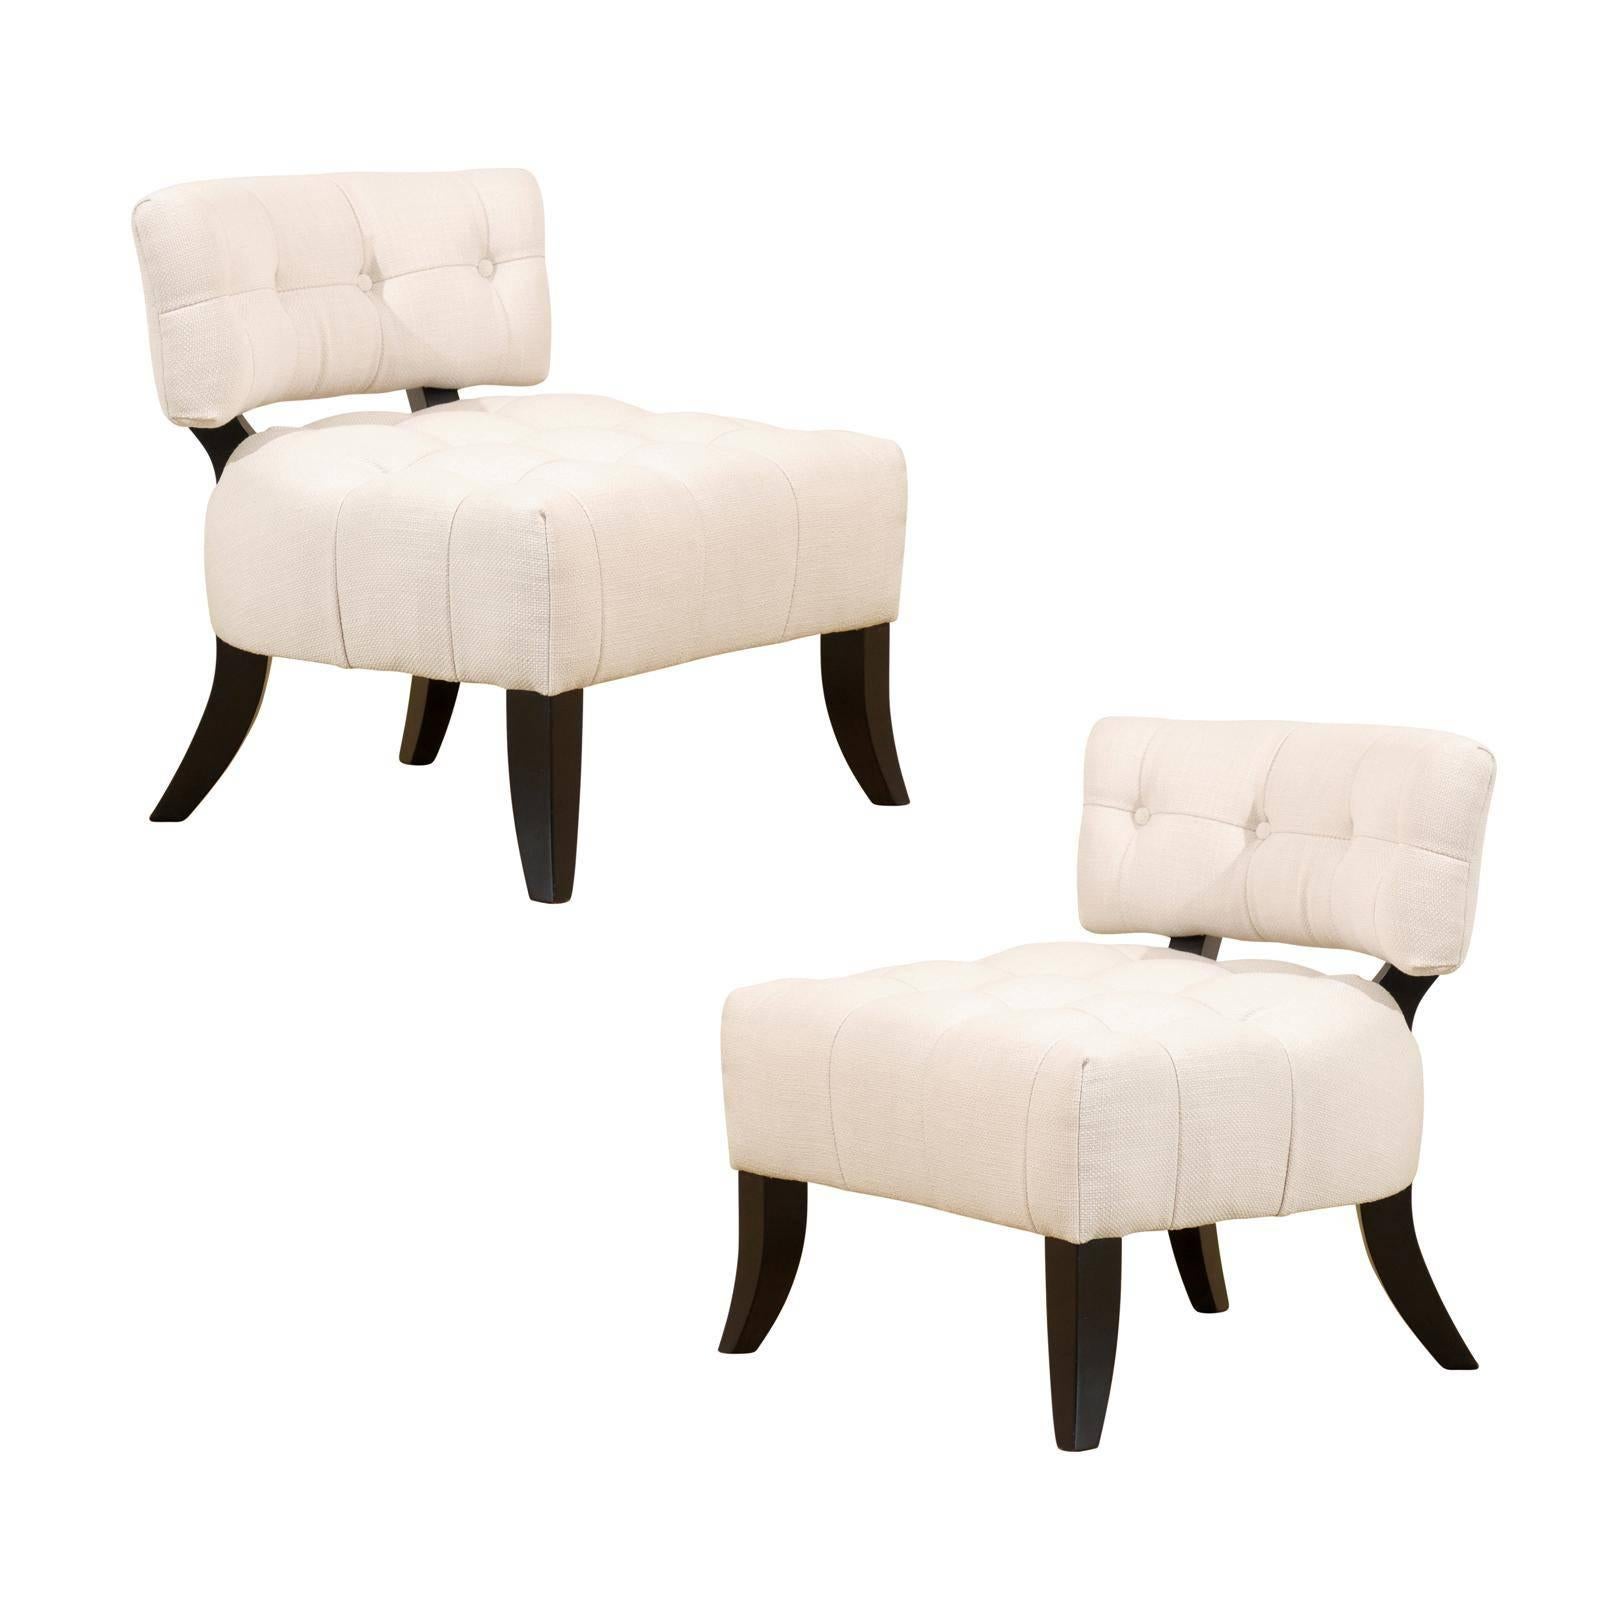 Fabulous Restored Pair of Biscuit Tufted Loungers in the Style of Billy Haines